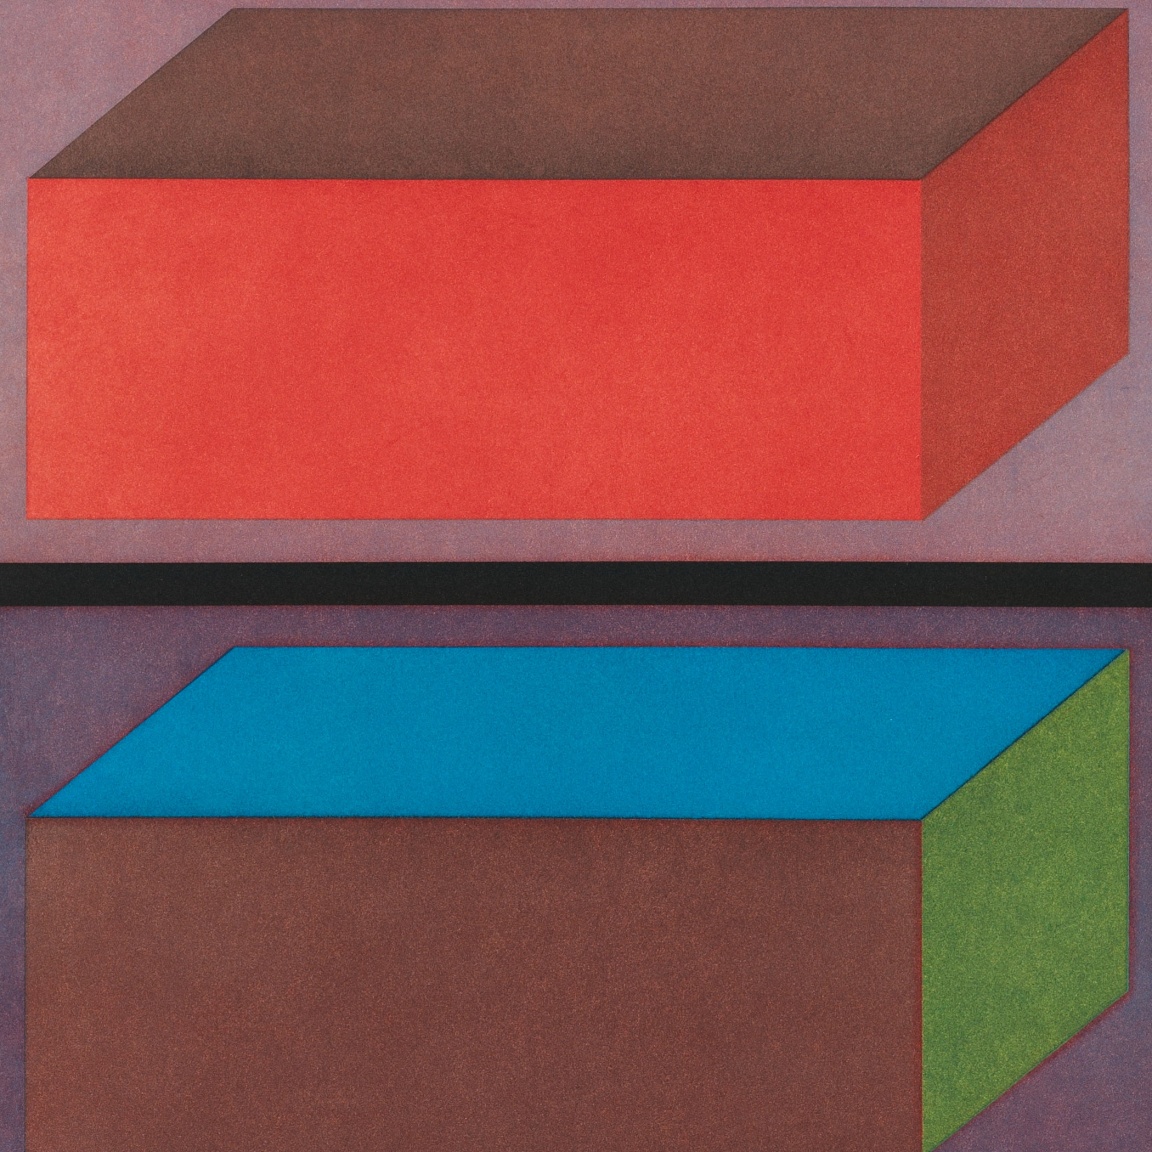 Detail of "Eight Cubic Rectangles" 